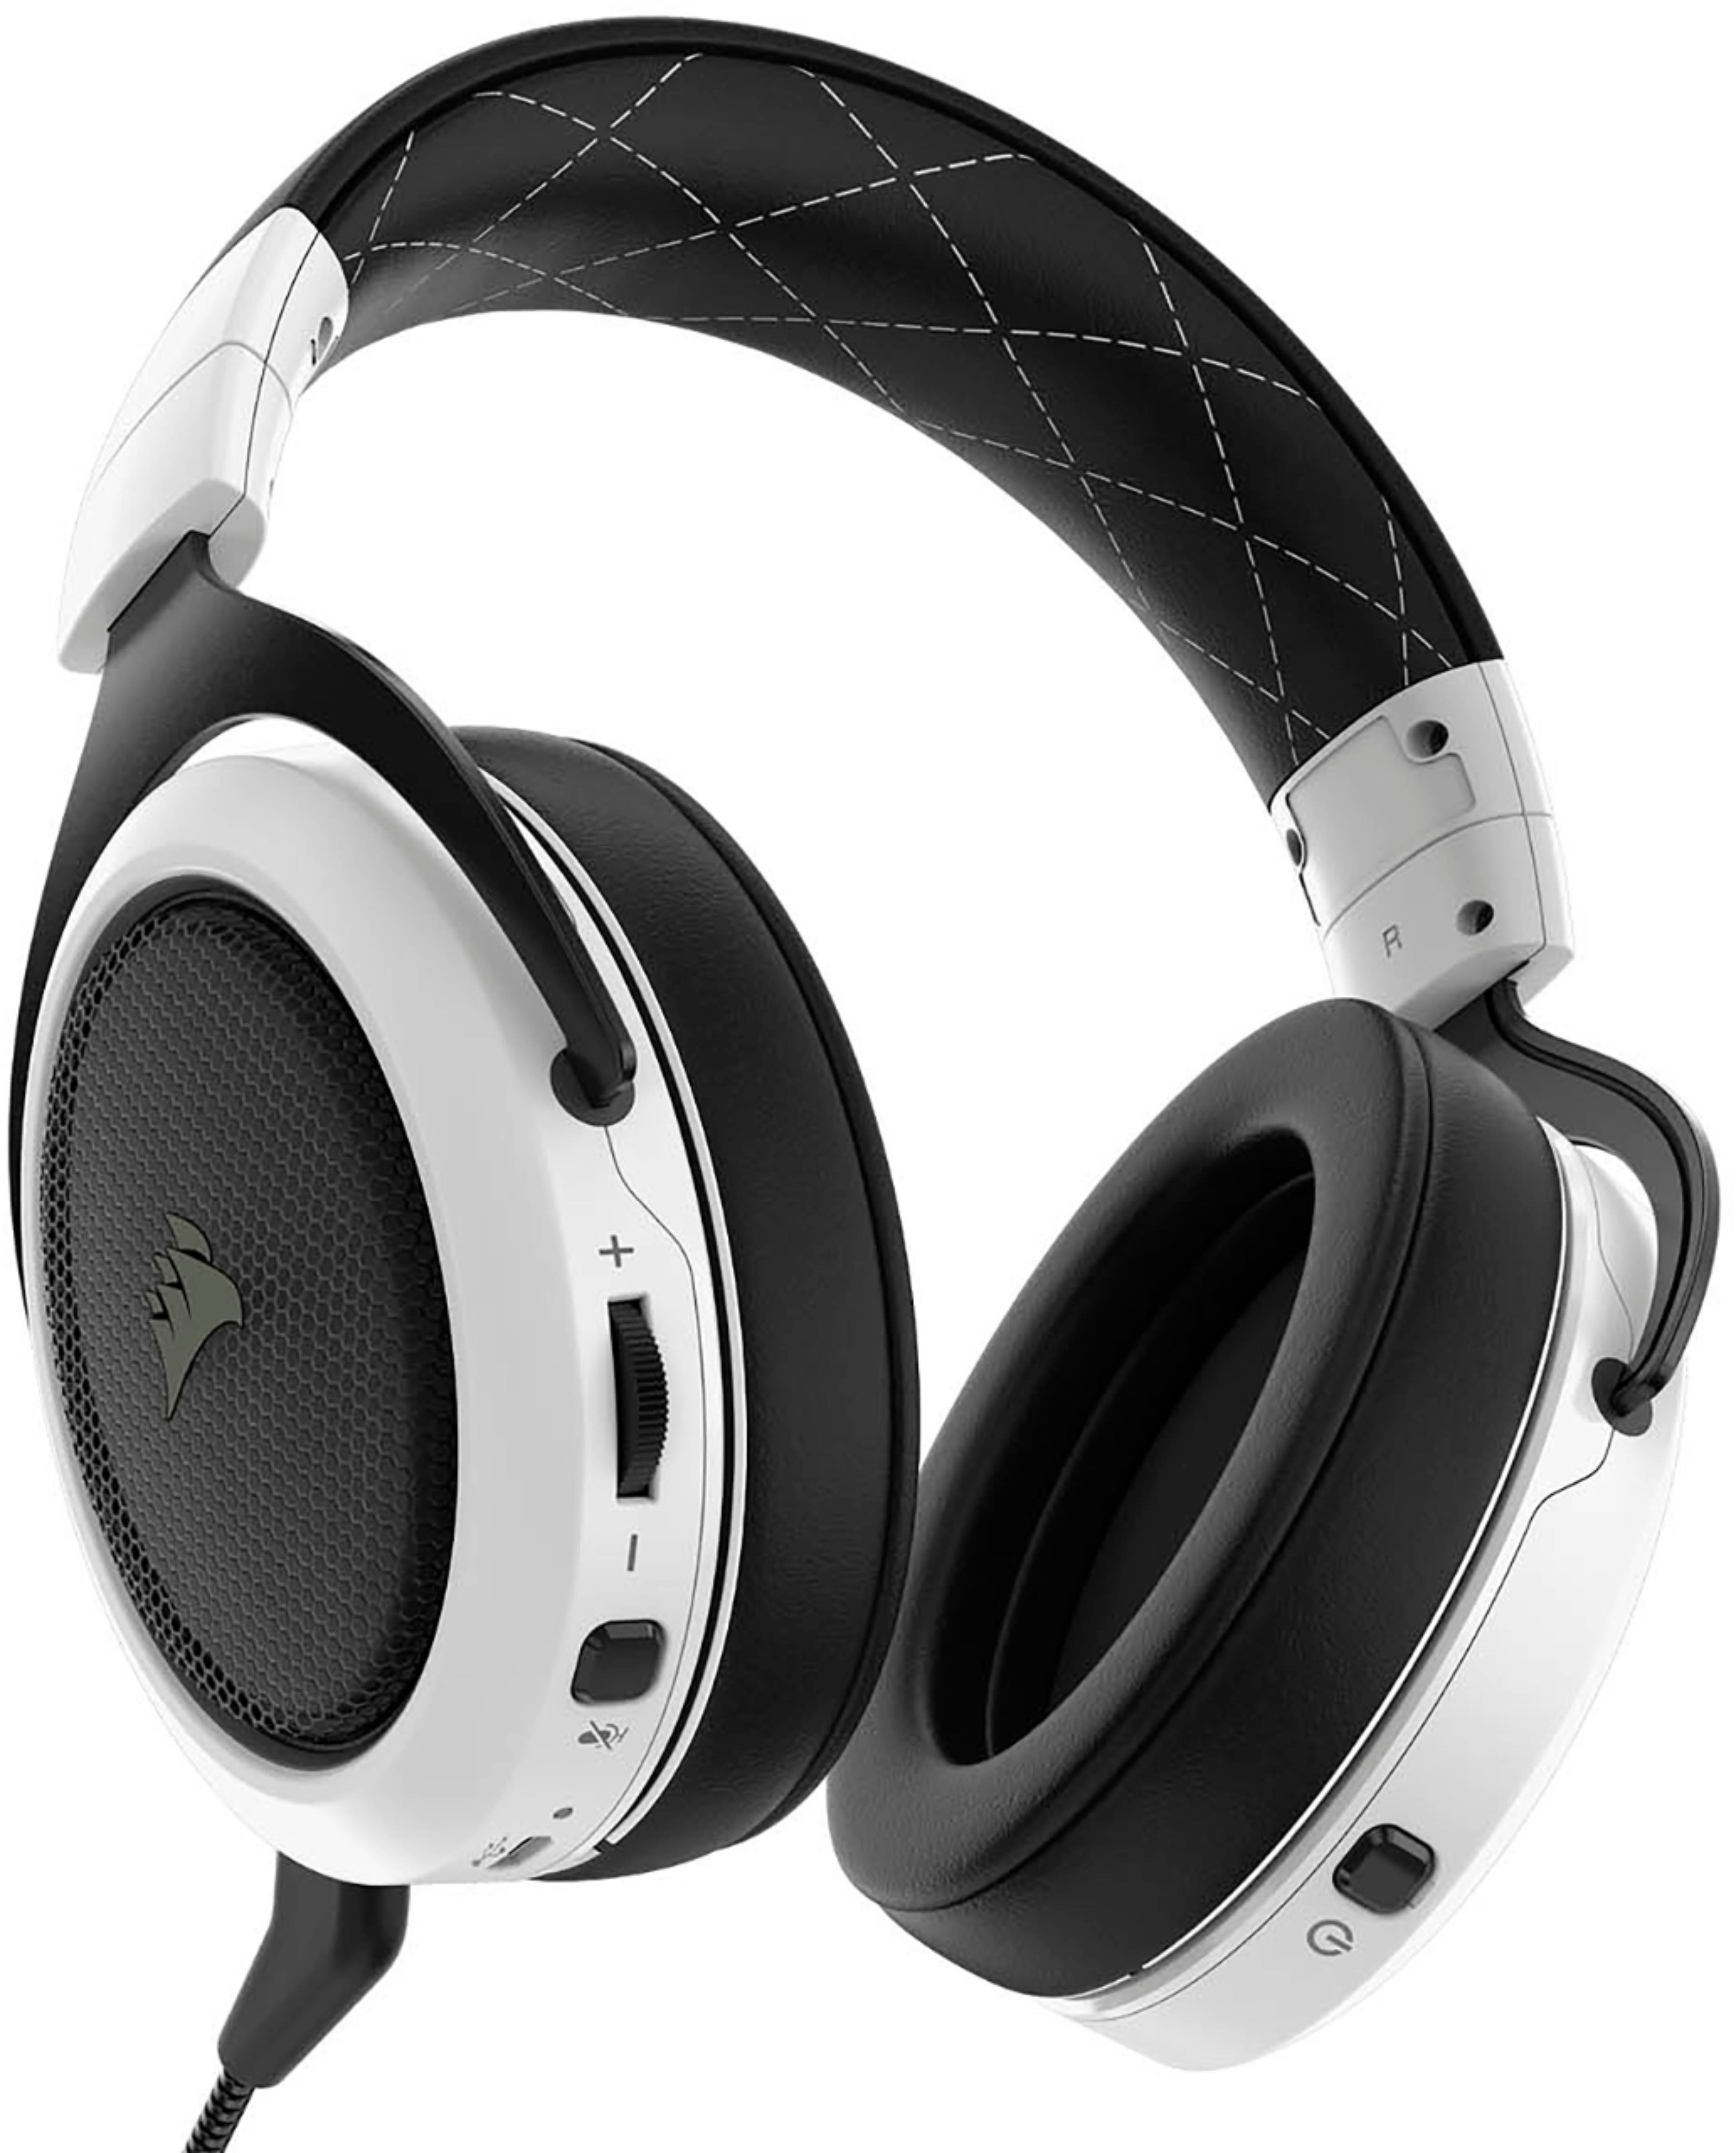 Best Buy: CORSAIR Wireless 7.1 Surround Sound Gaming Headset for and PlayStation 4 White CA-9011177-NA